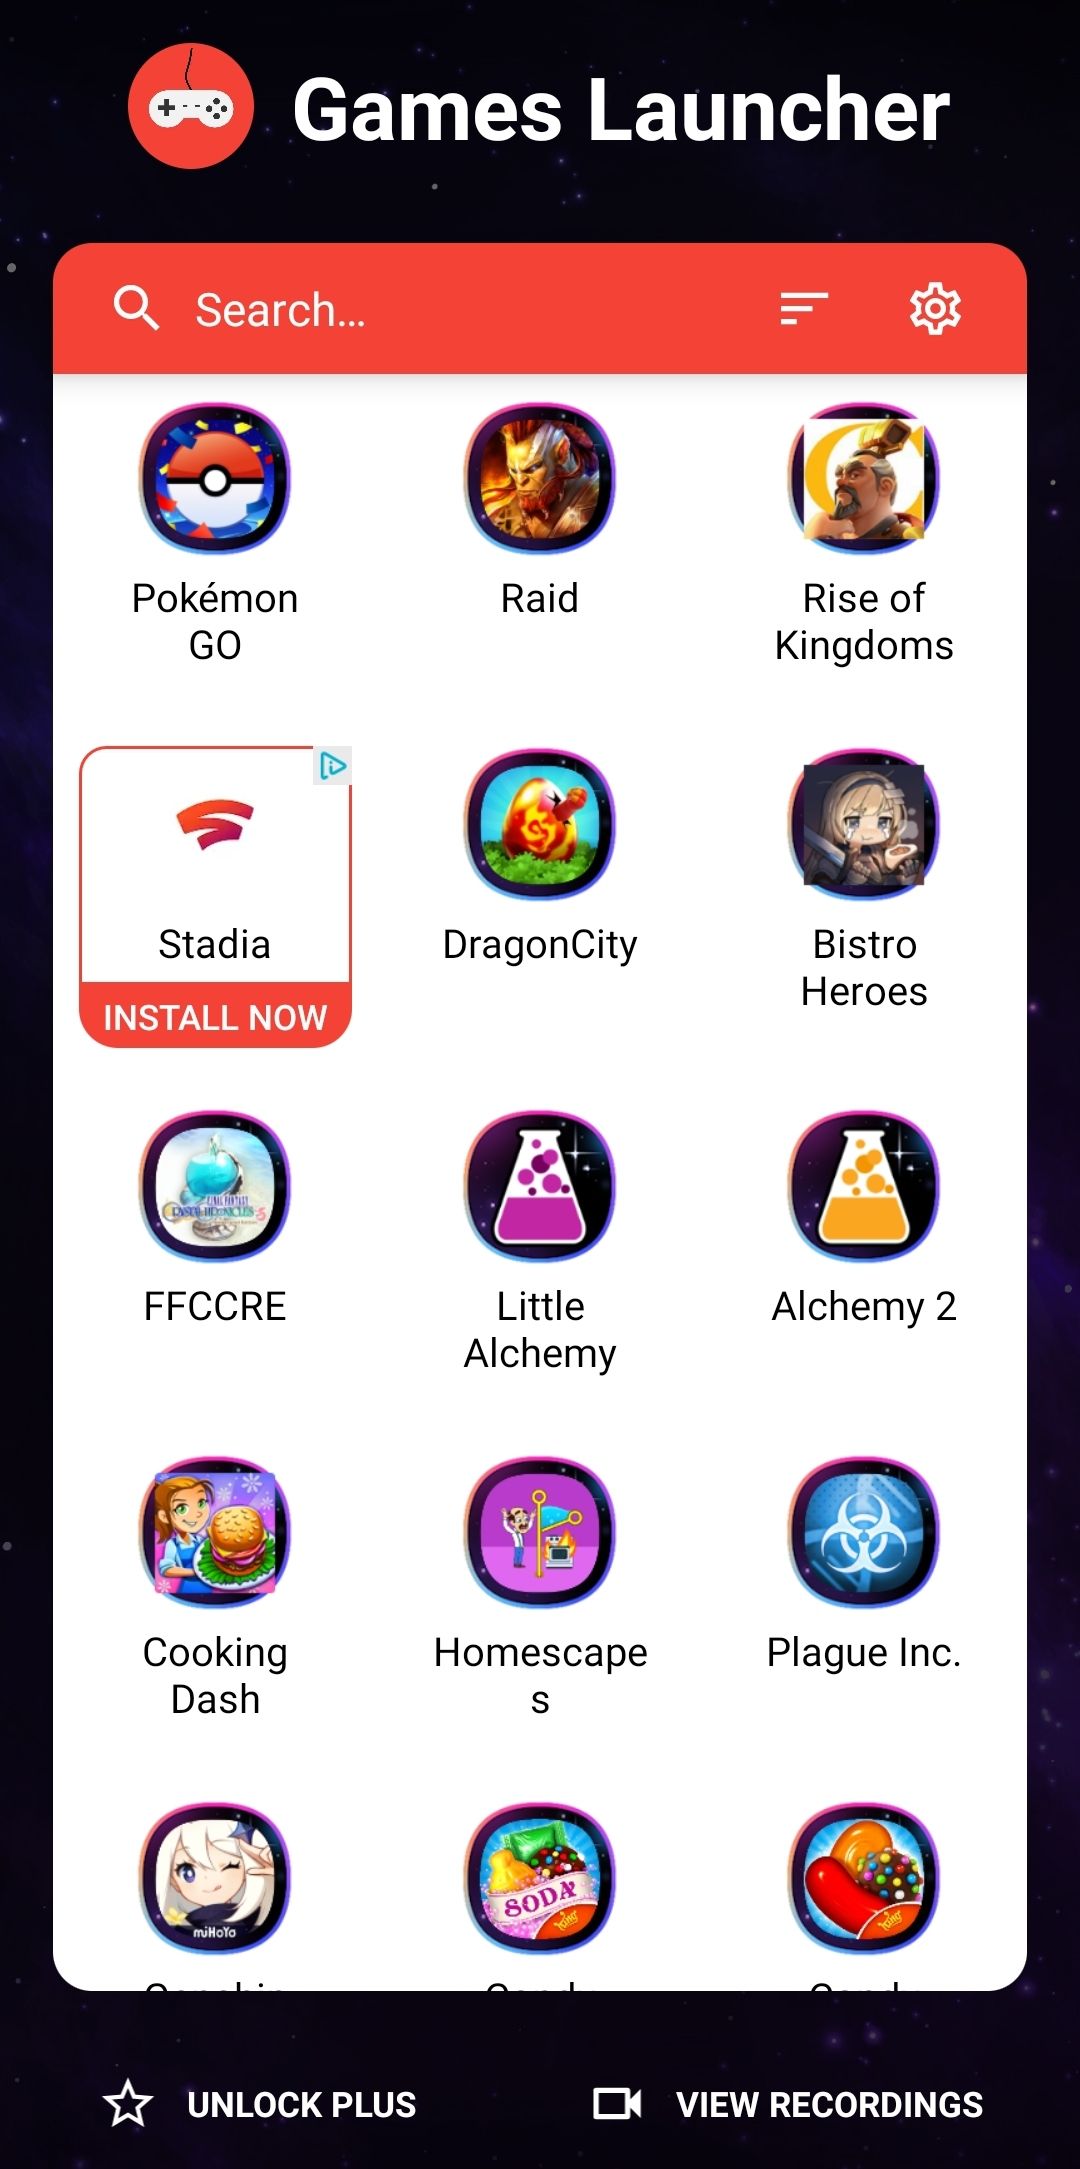 Games Launcher's library is also the home screen